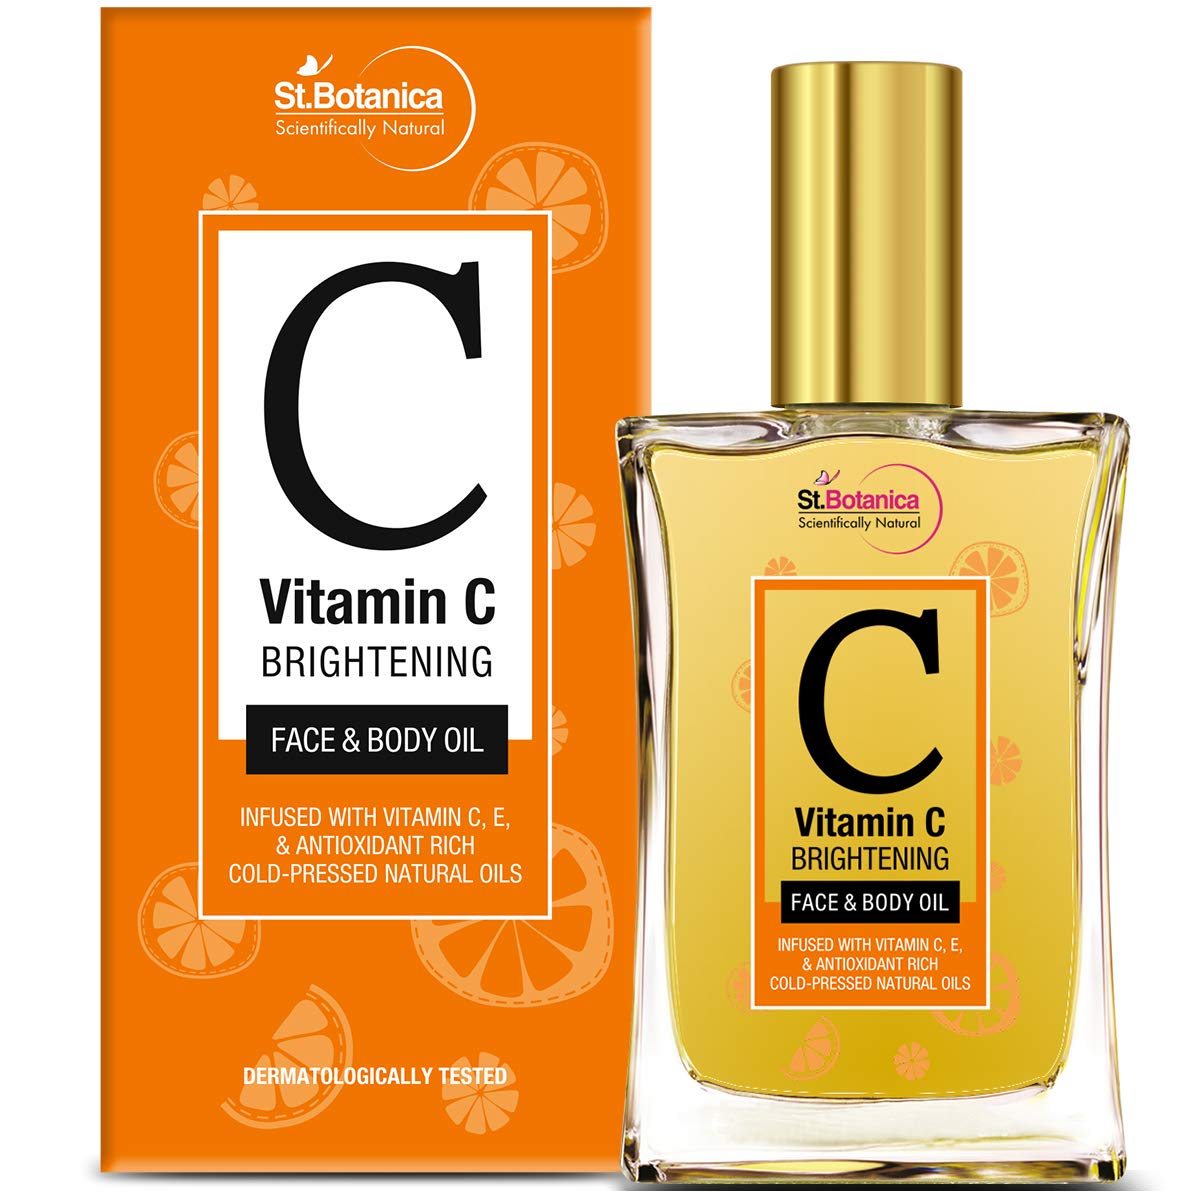 St.Botanica Vitamin C Brightening Face & Body Oil, Infused With Antioxidants And Natural Oils, 100 ml (STBOT676)